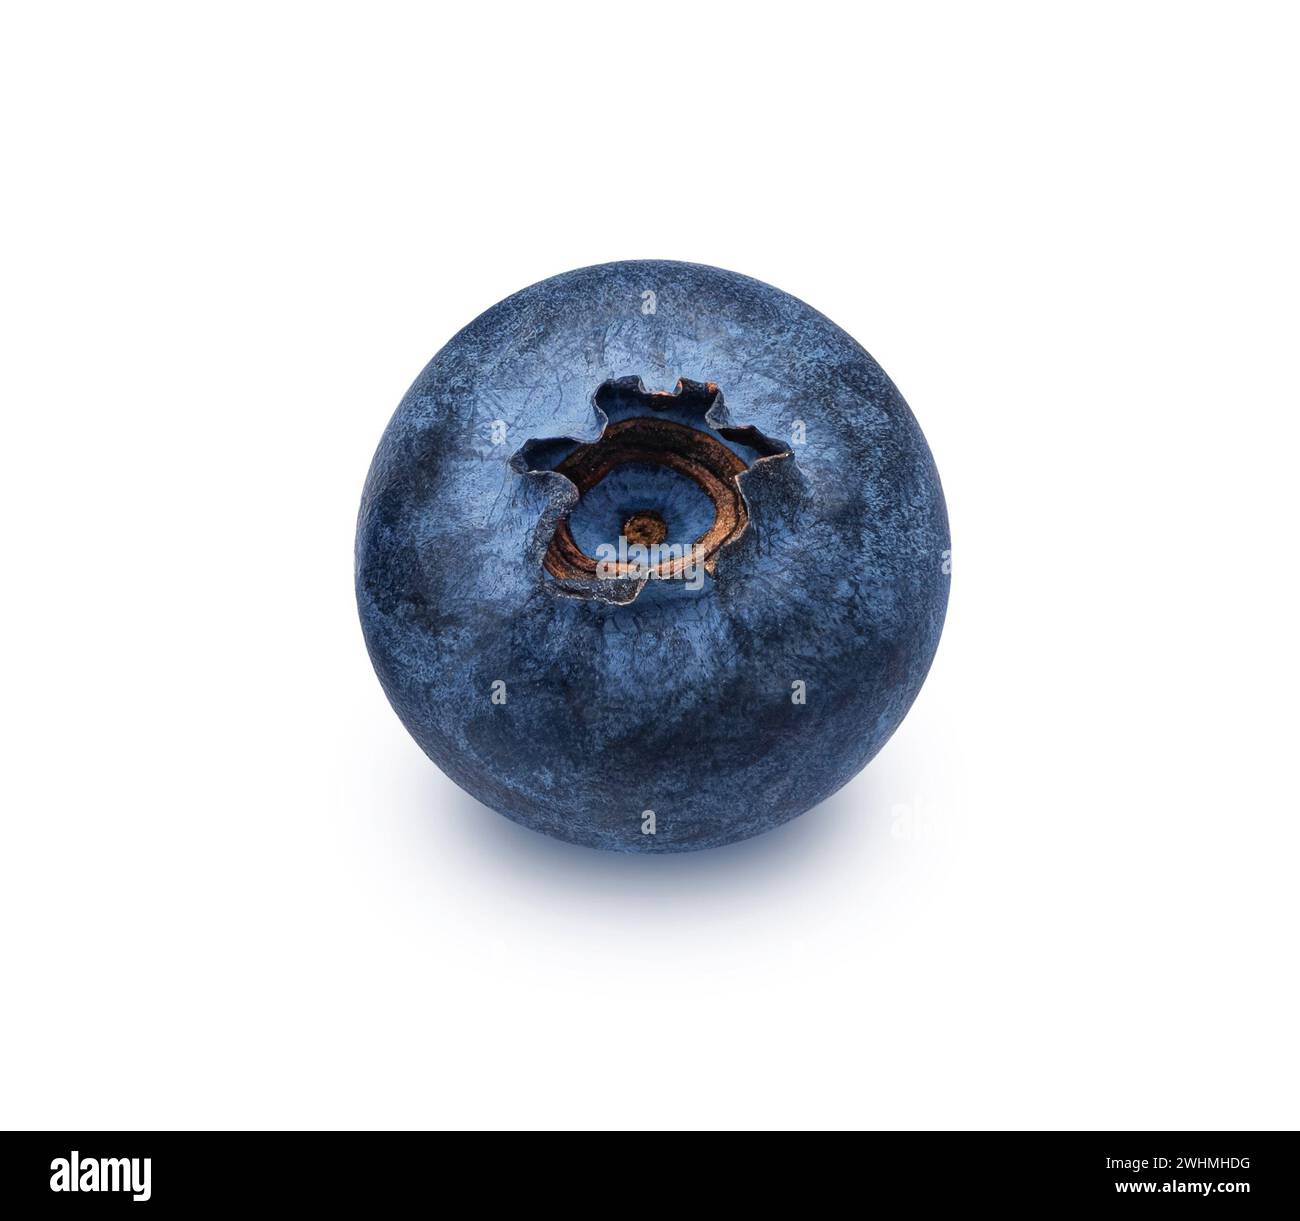 One blueberry isolated on white background, full depth of field Stock Photo